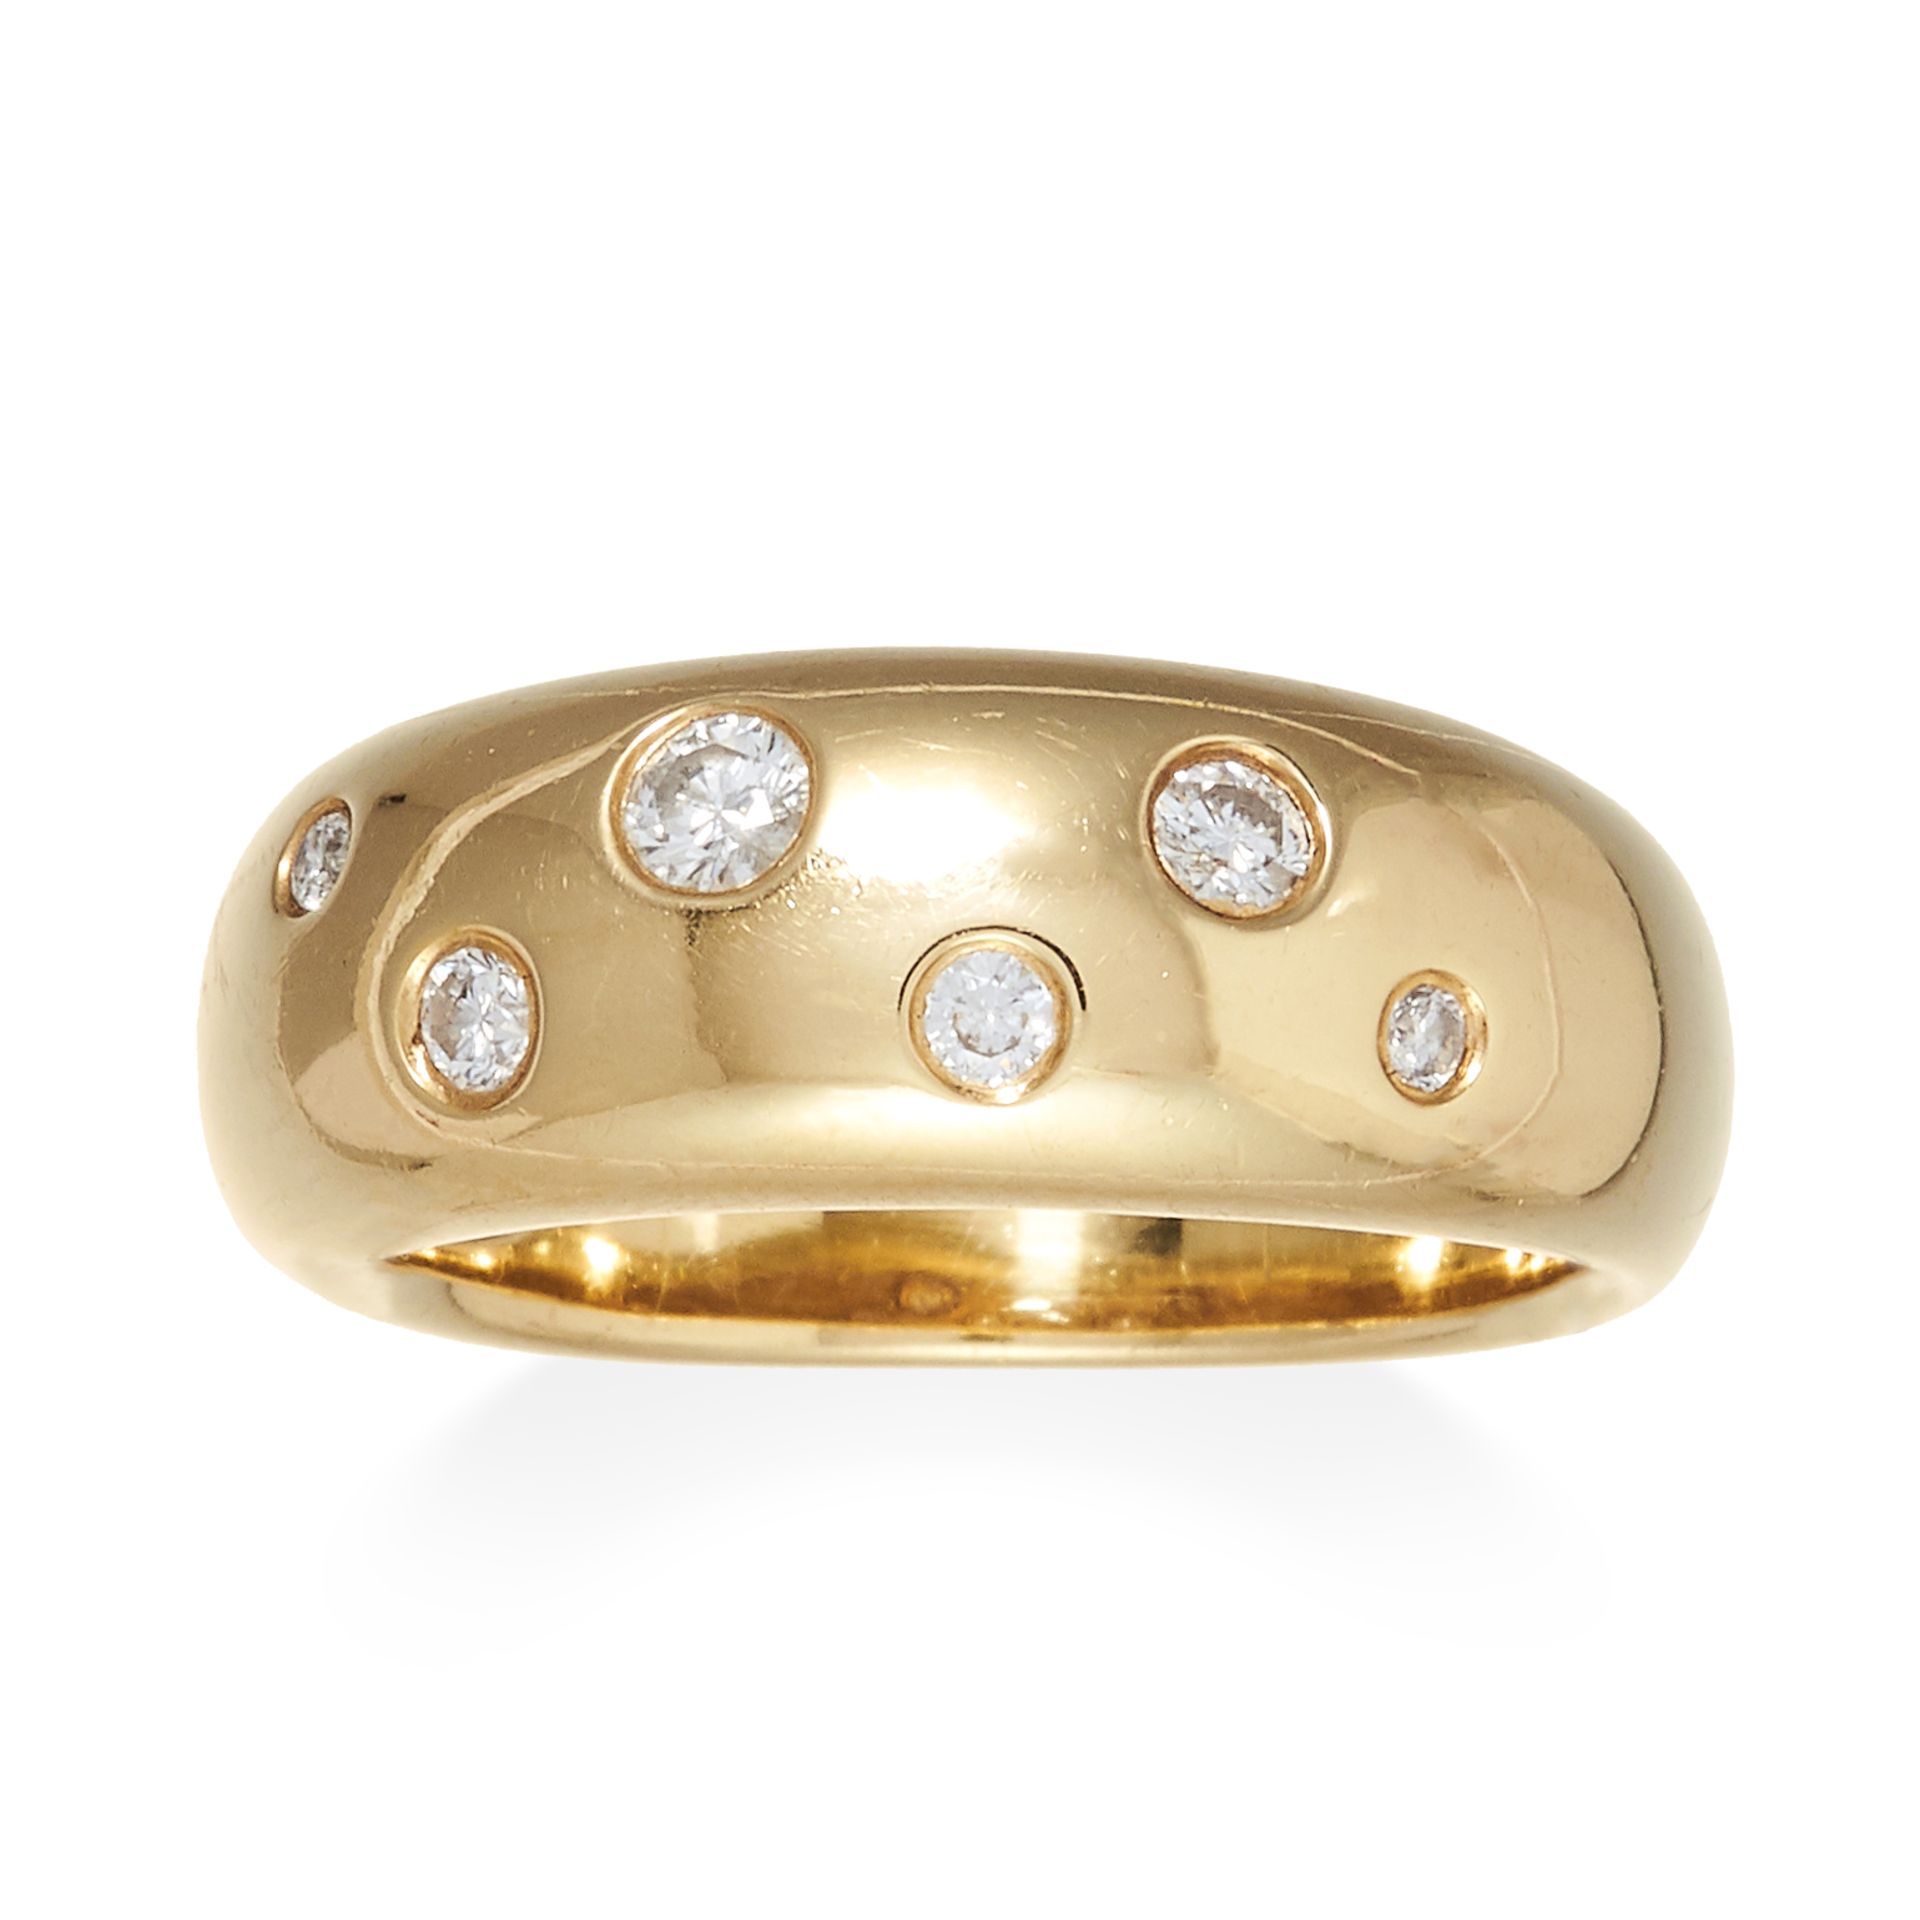 A DIAMOND BOMBE RING in 18ct yellow gold, jewelled with six round cut diamonds, stamped 18K, size